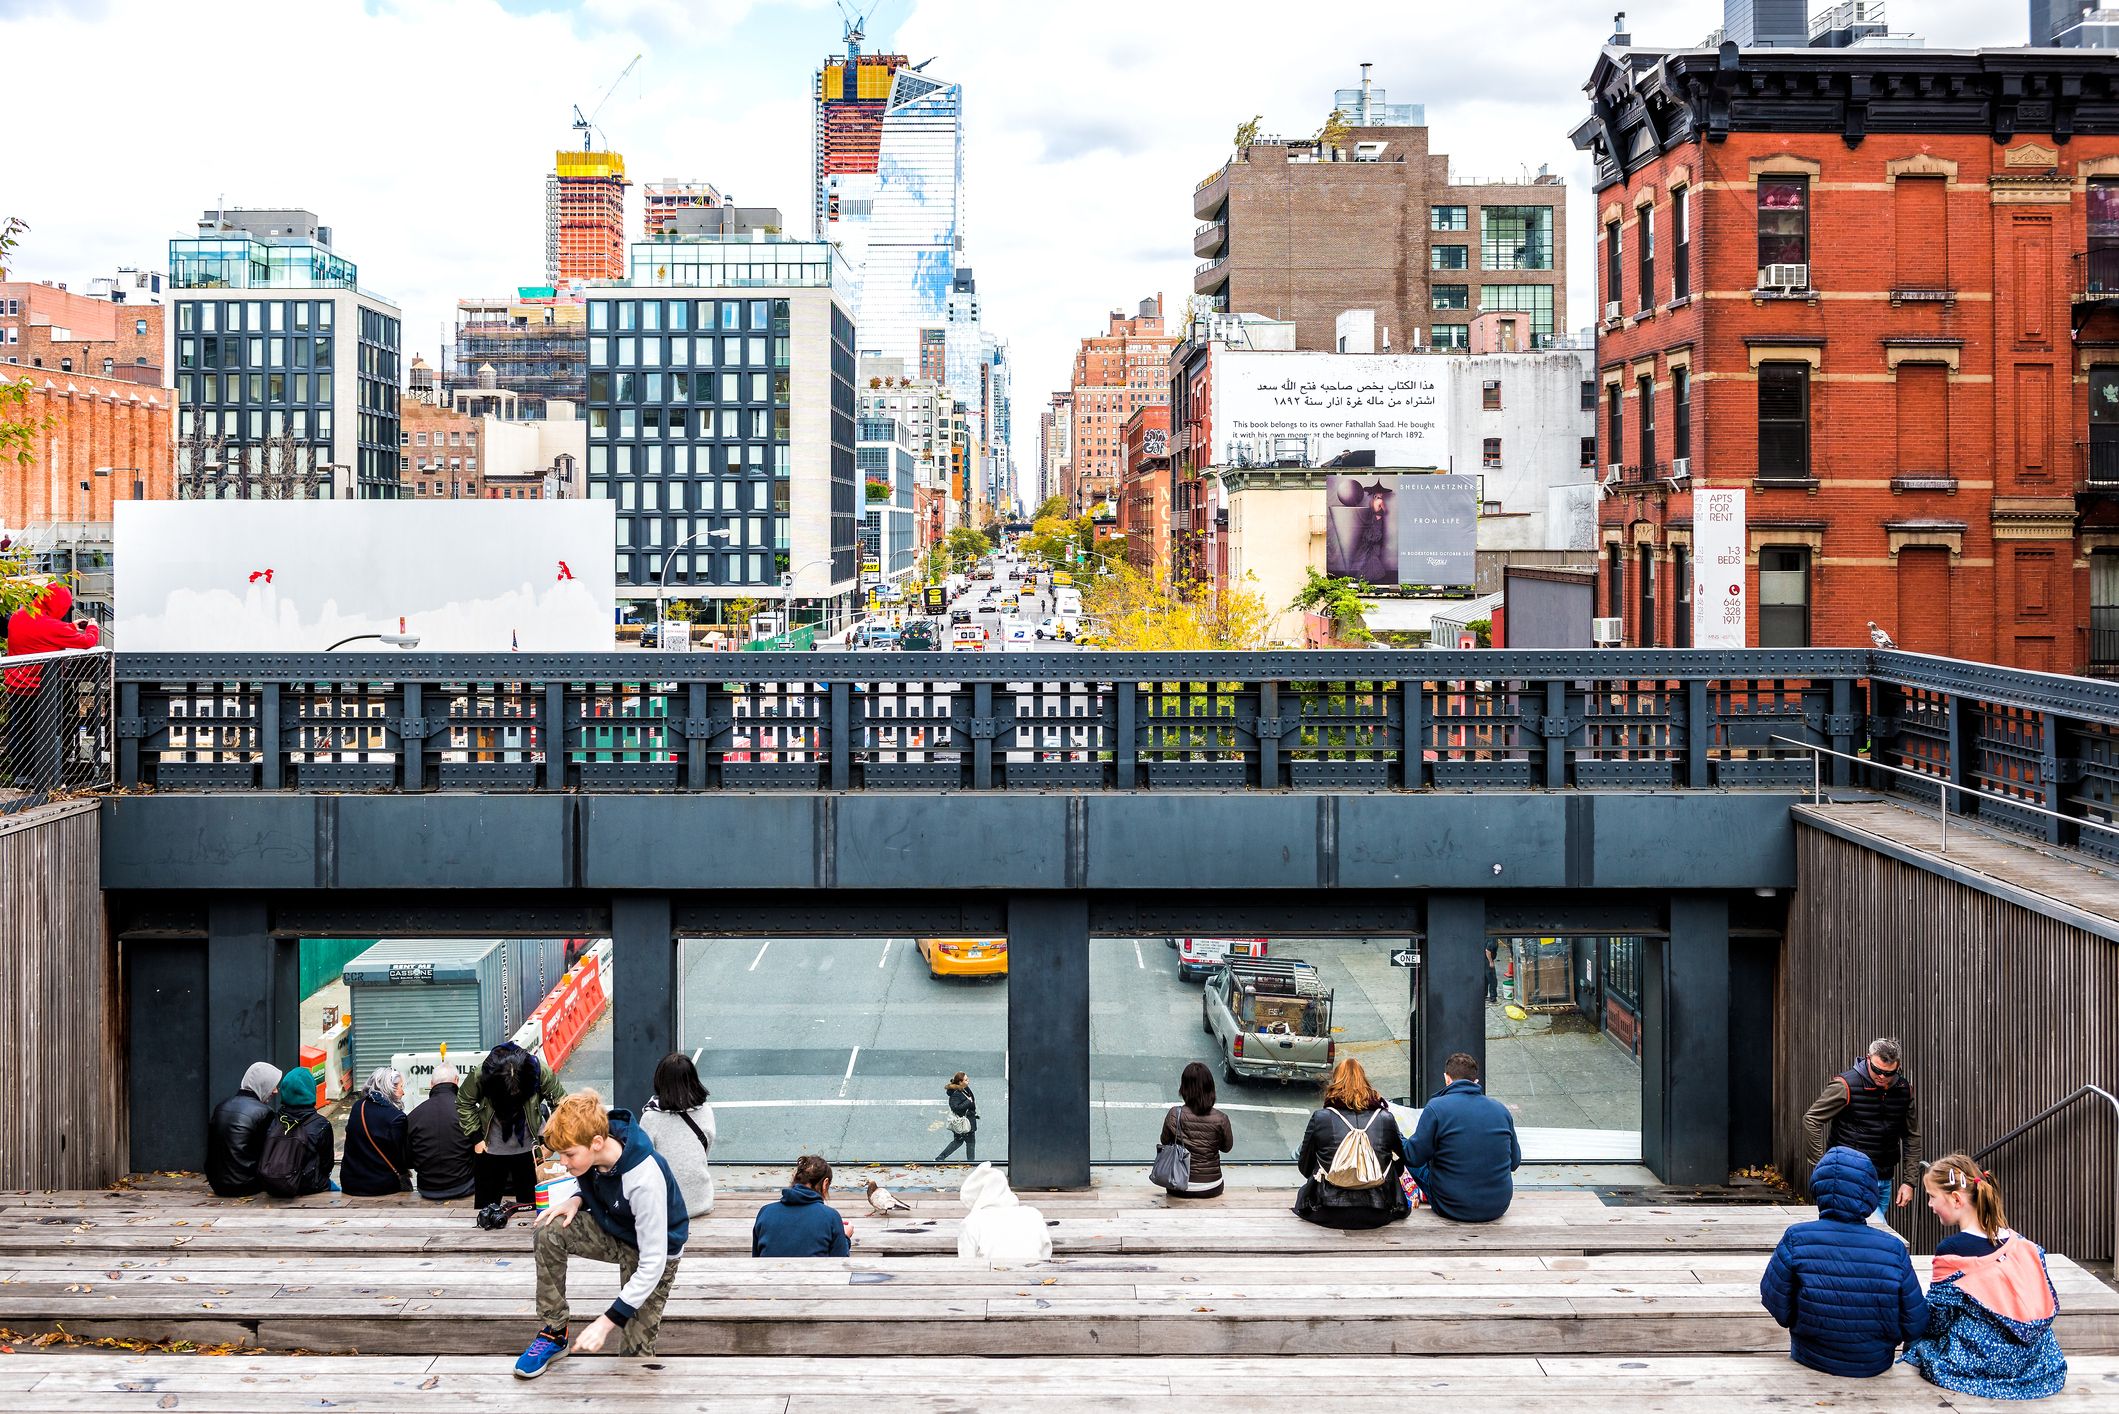 The High Line Apartments